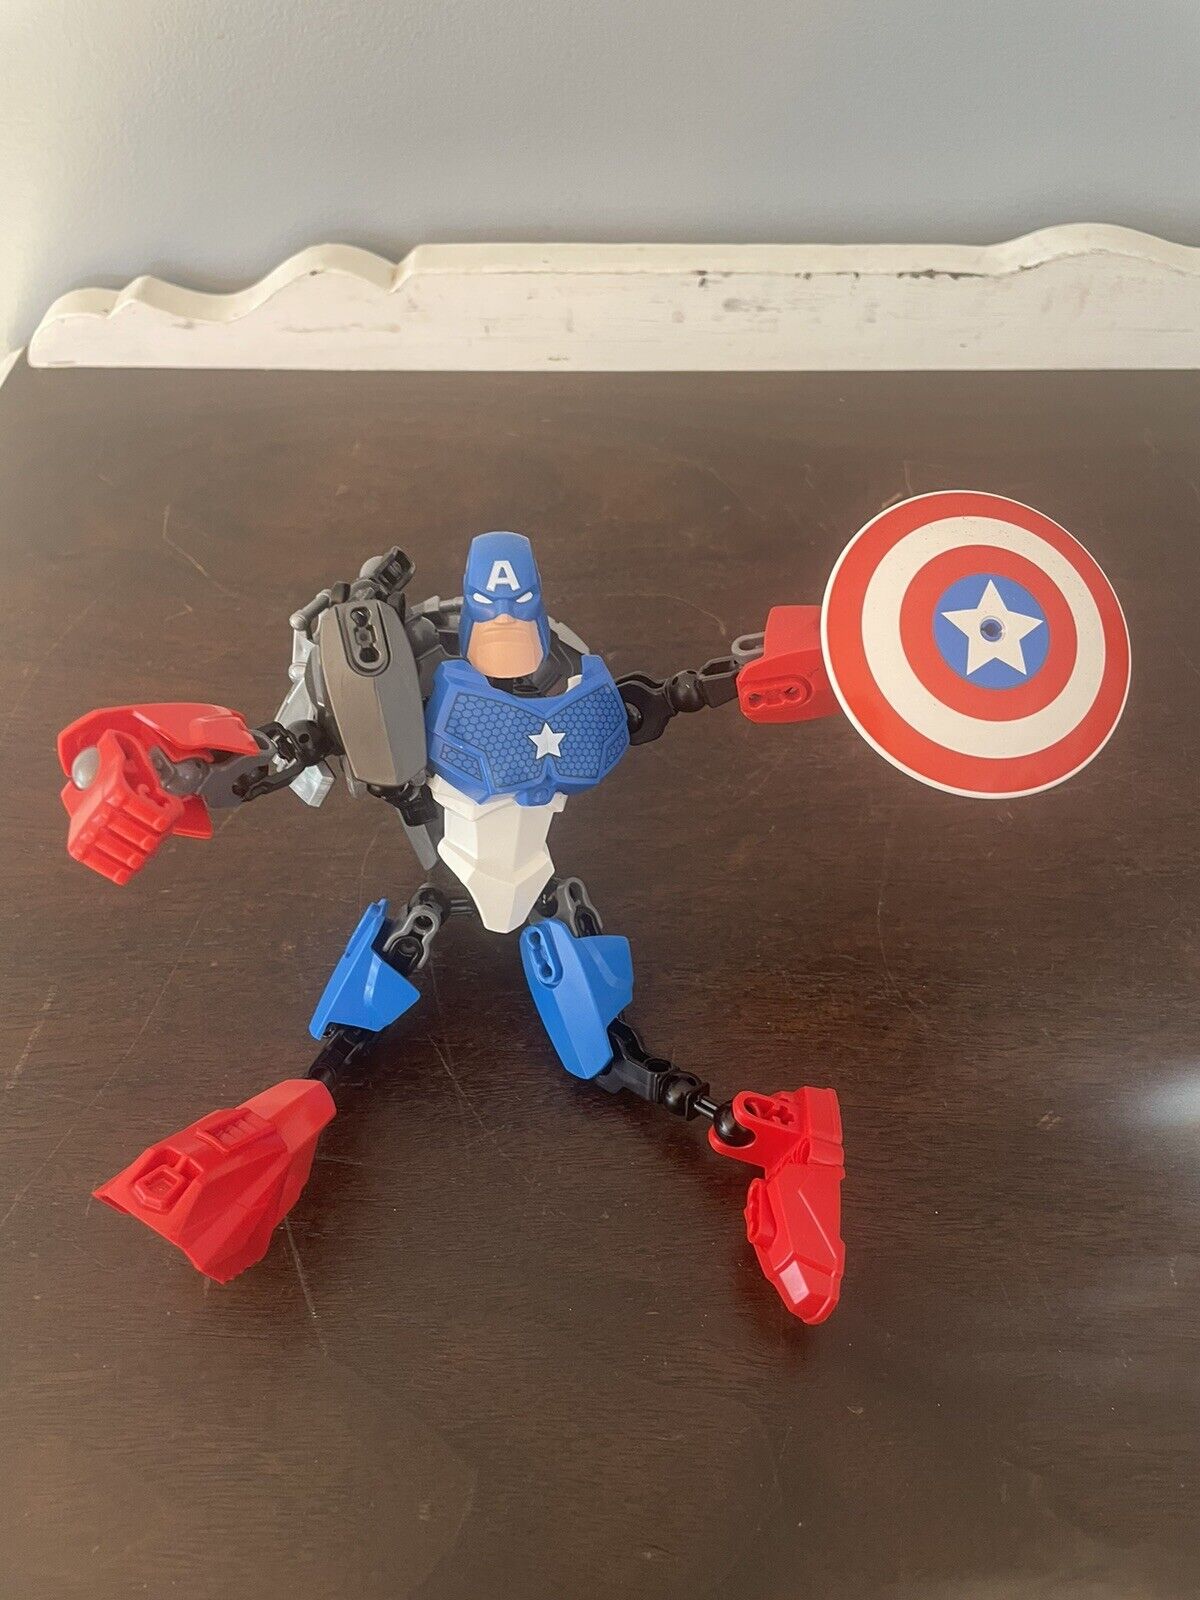 Lego 4597 Marvel Super Heroes Captain America Bionicle. INCOMPLETE